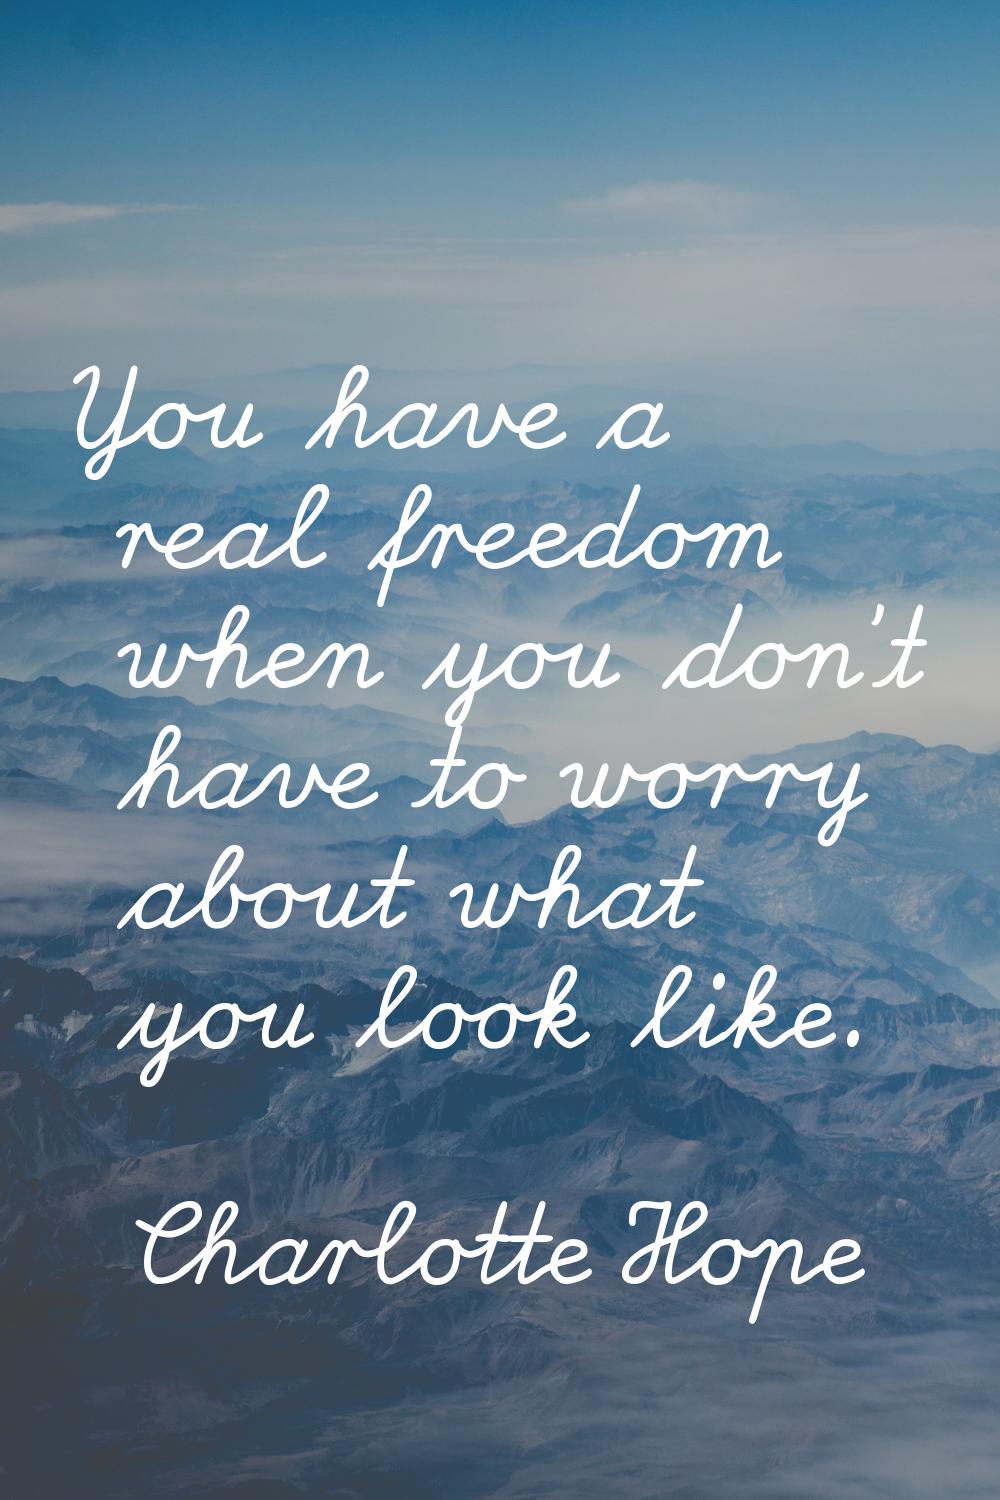 You have a real freedom when you don't have to worry about what you look like.